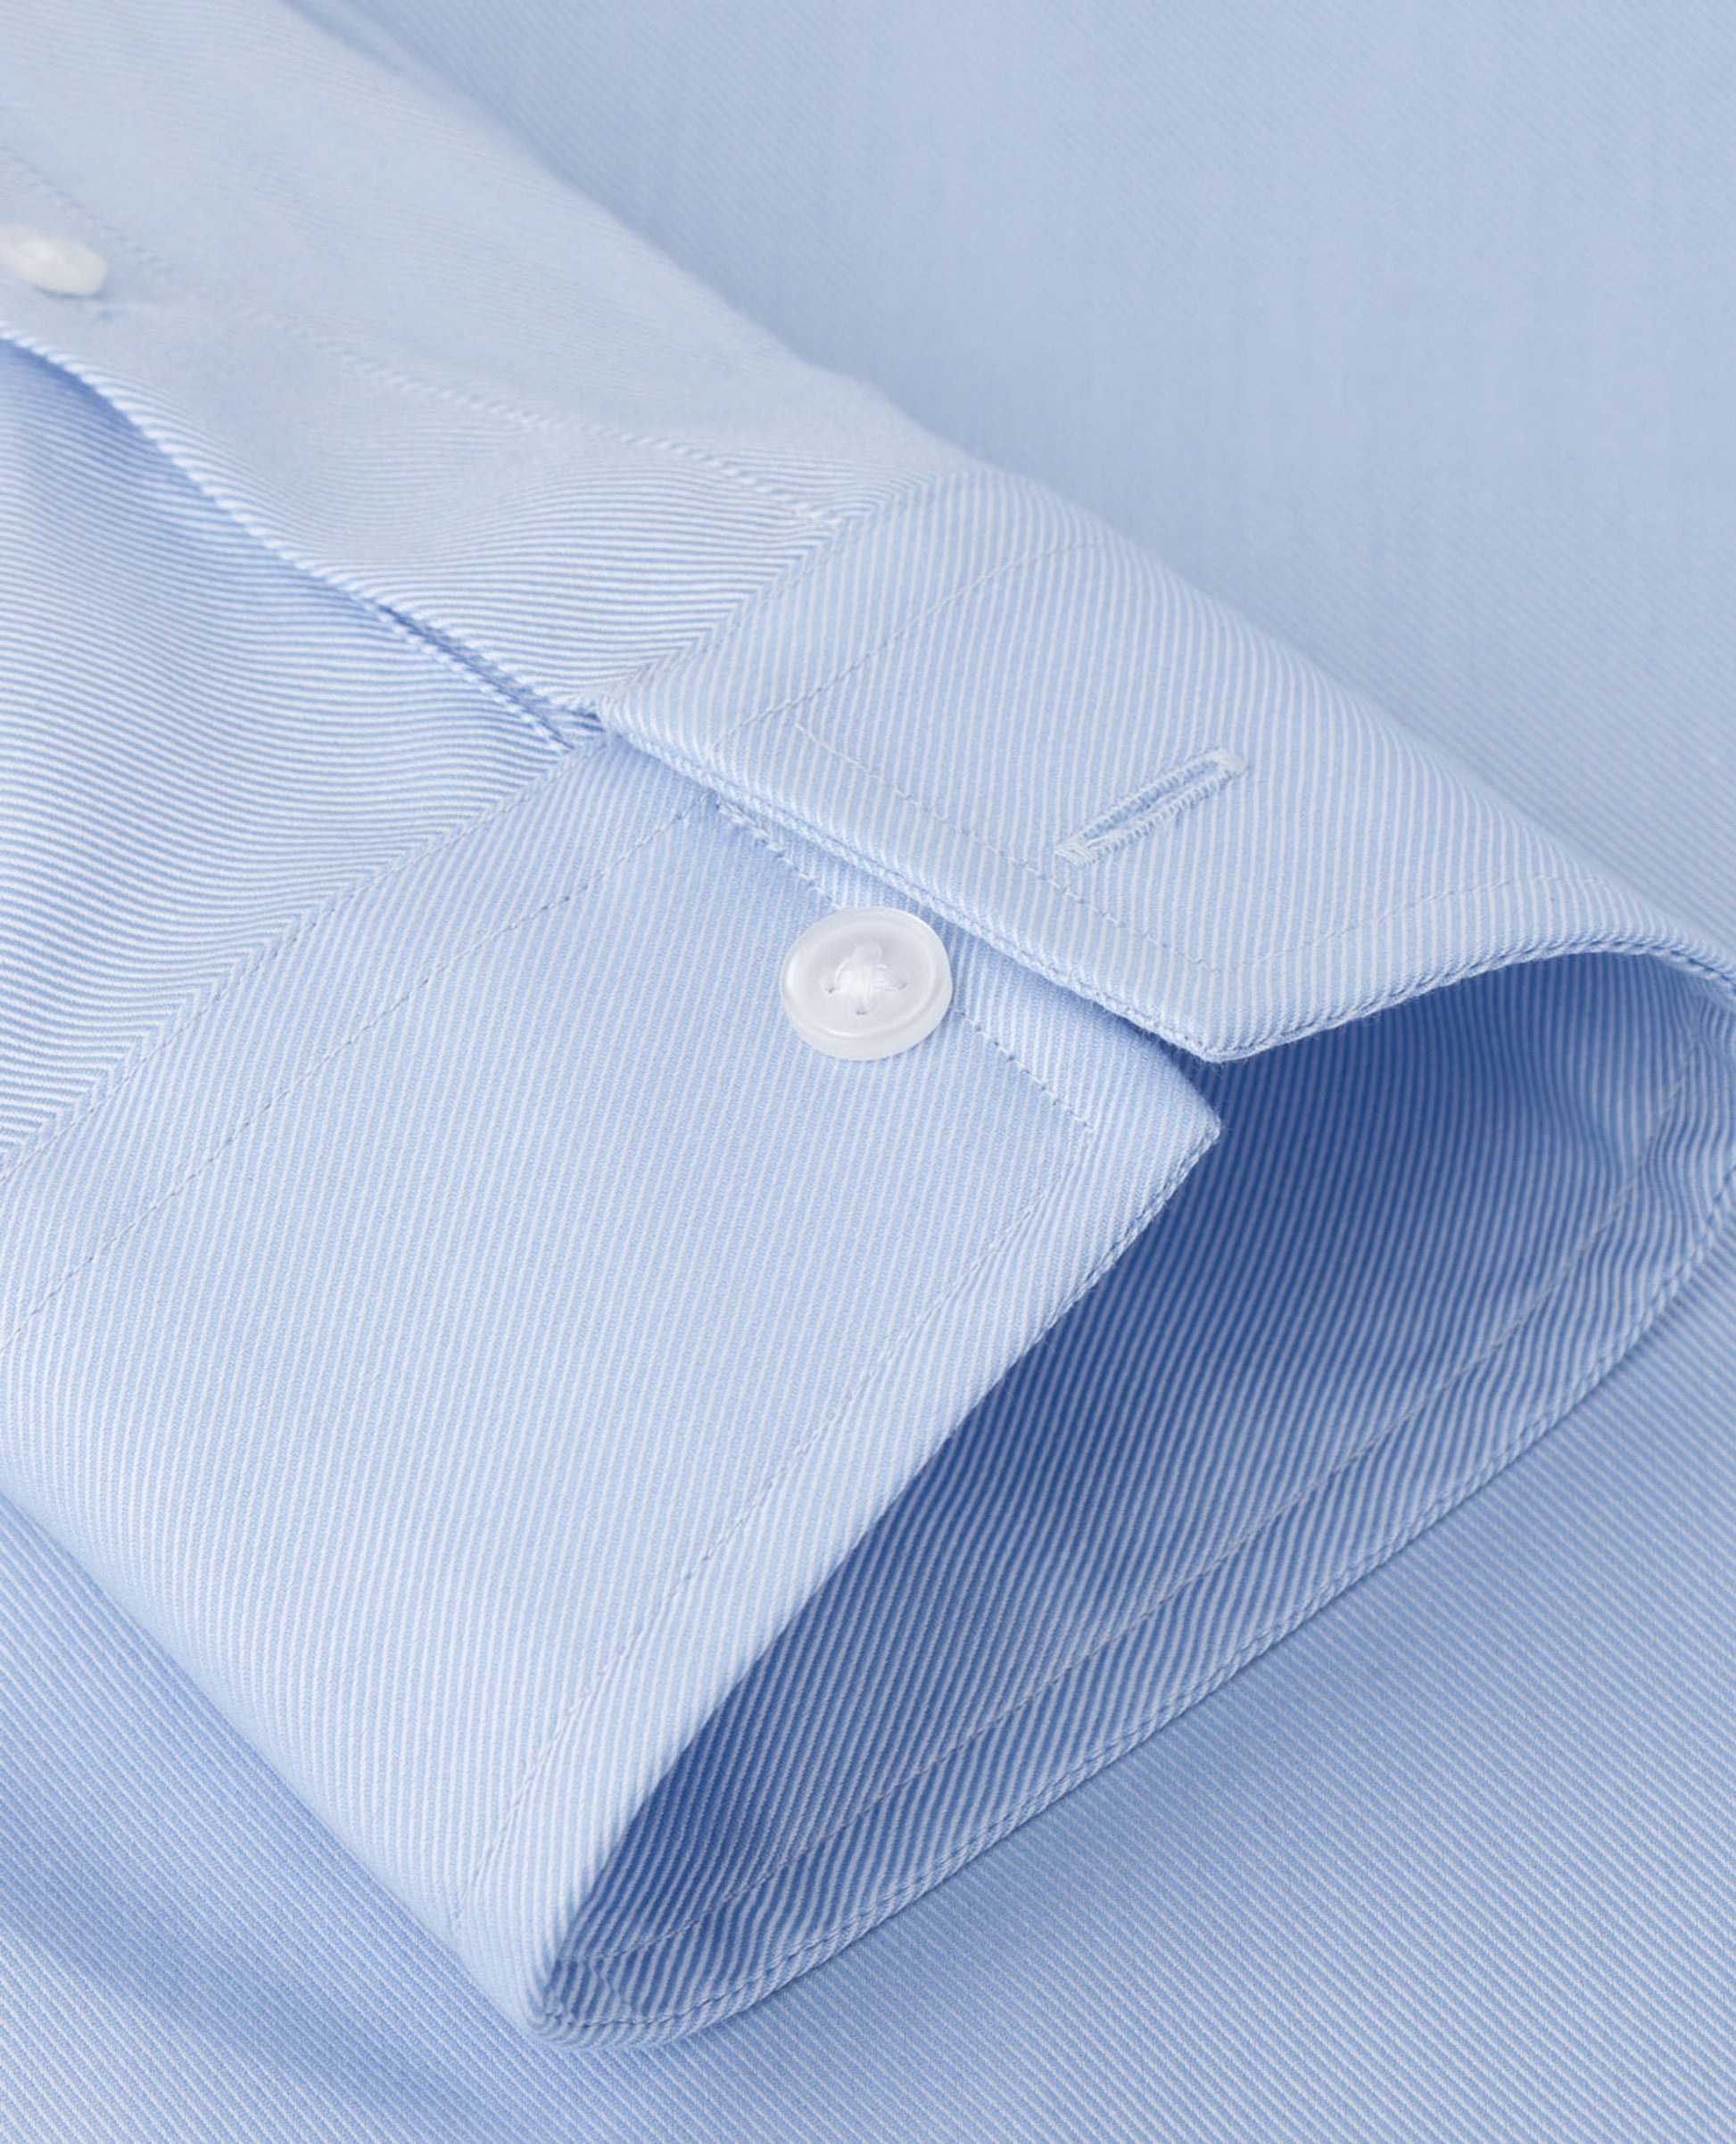 Image 4 of Blue Luxury Twill Fitted Single Cuff Classic Collar Shirt